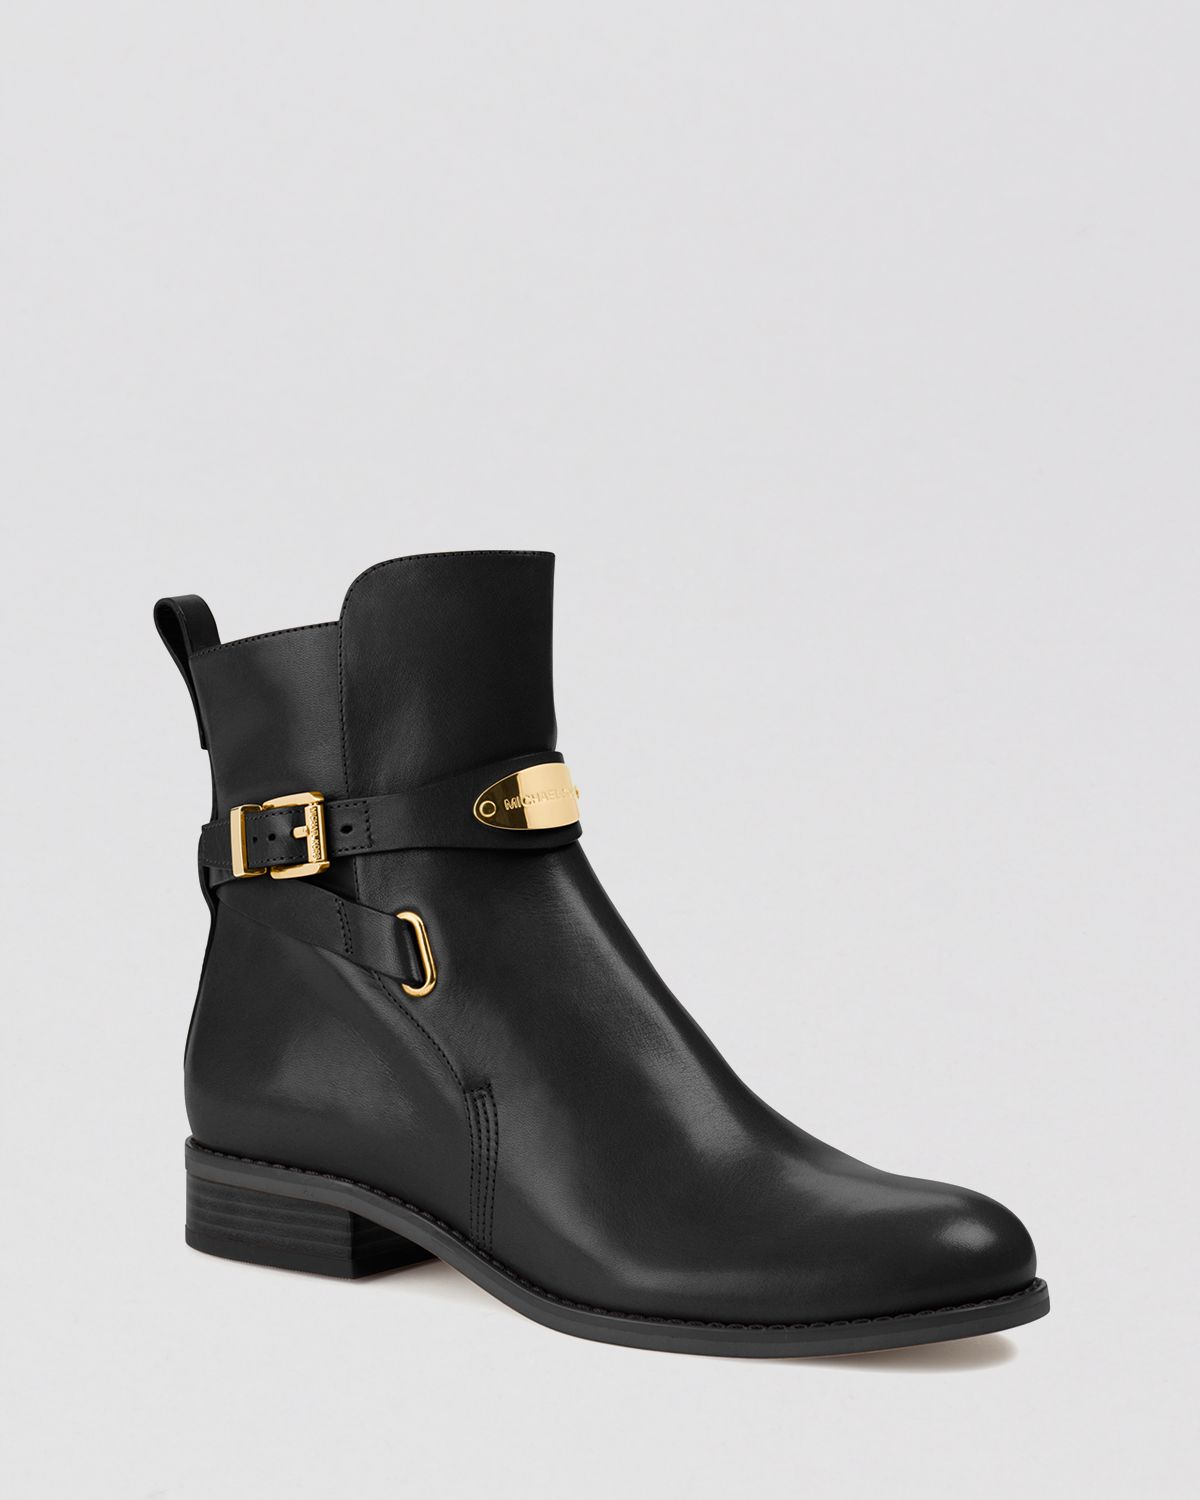 Lyst - MICHAEL Michael Kors Ankle Boots Arley in Black